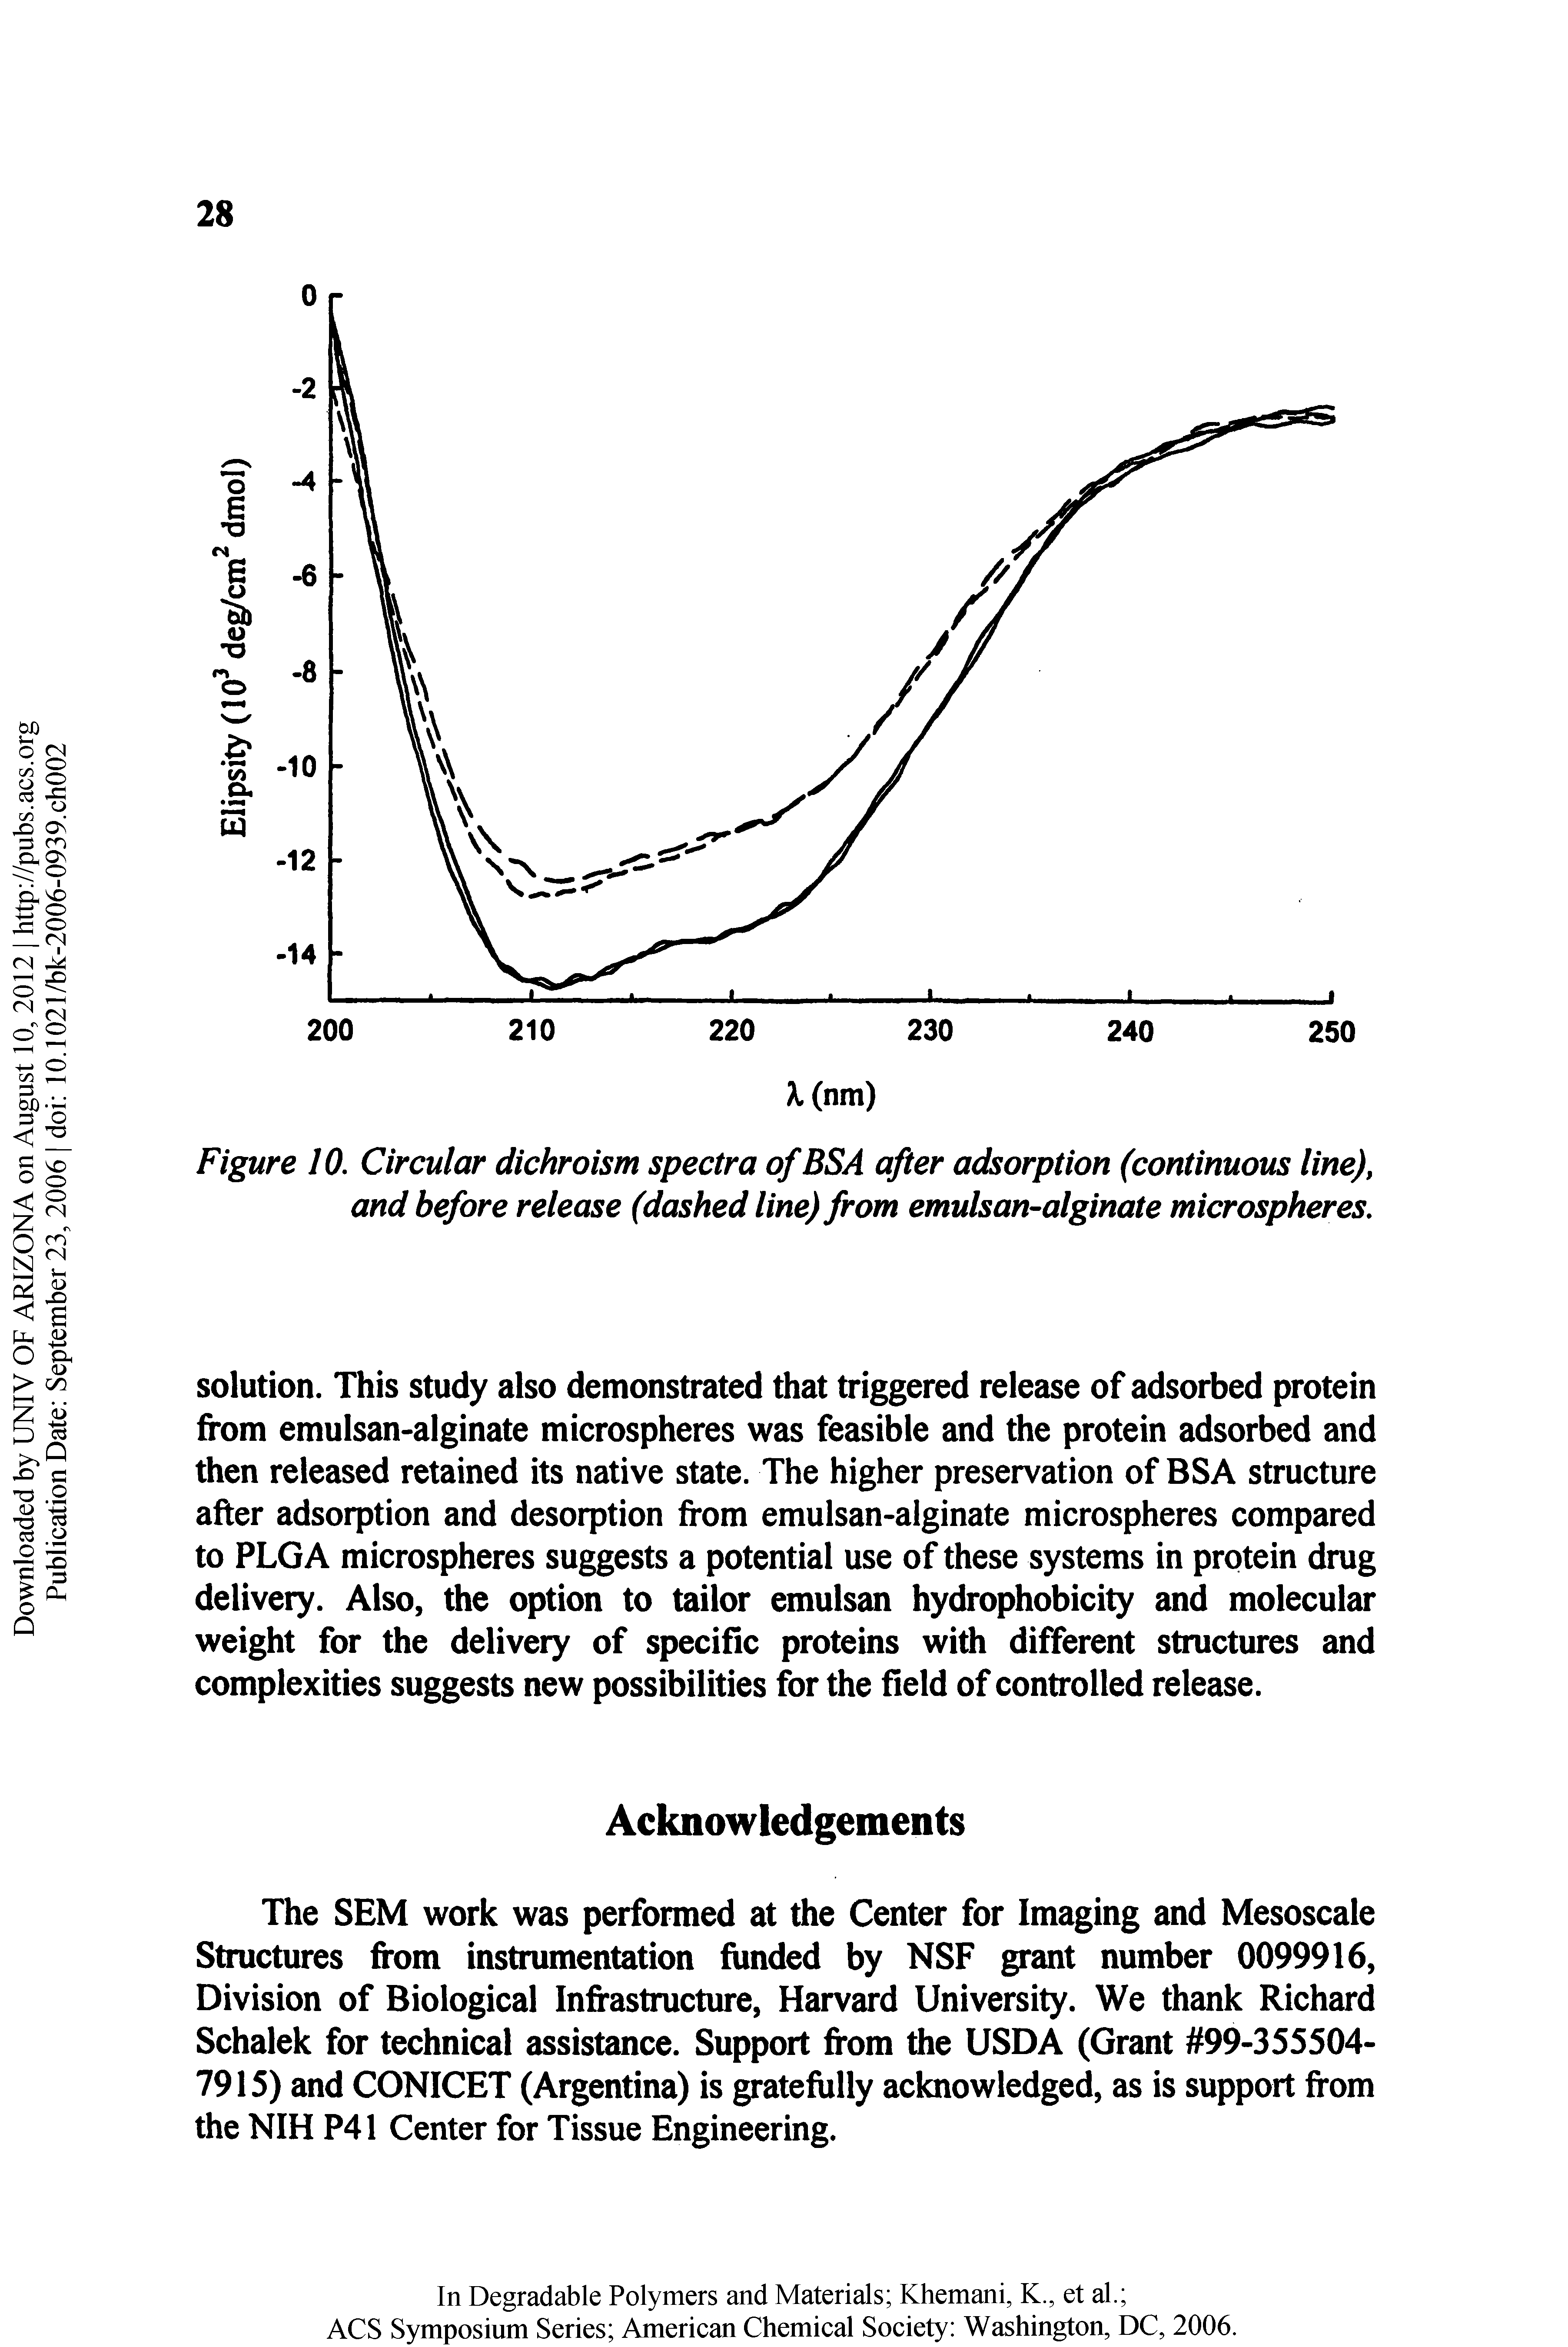 Figure 10. Circular dichroism spectra ofBSA after adsorption (continuous line), and before release (dashed line) from emulsan-alginate microspheres.